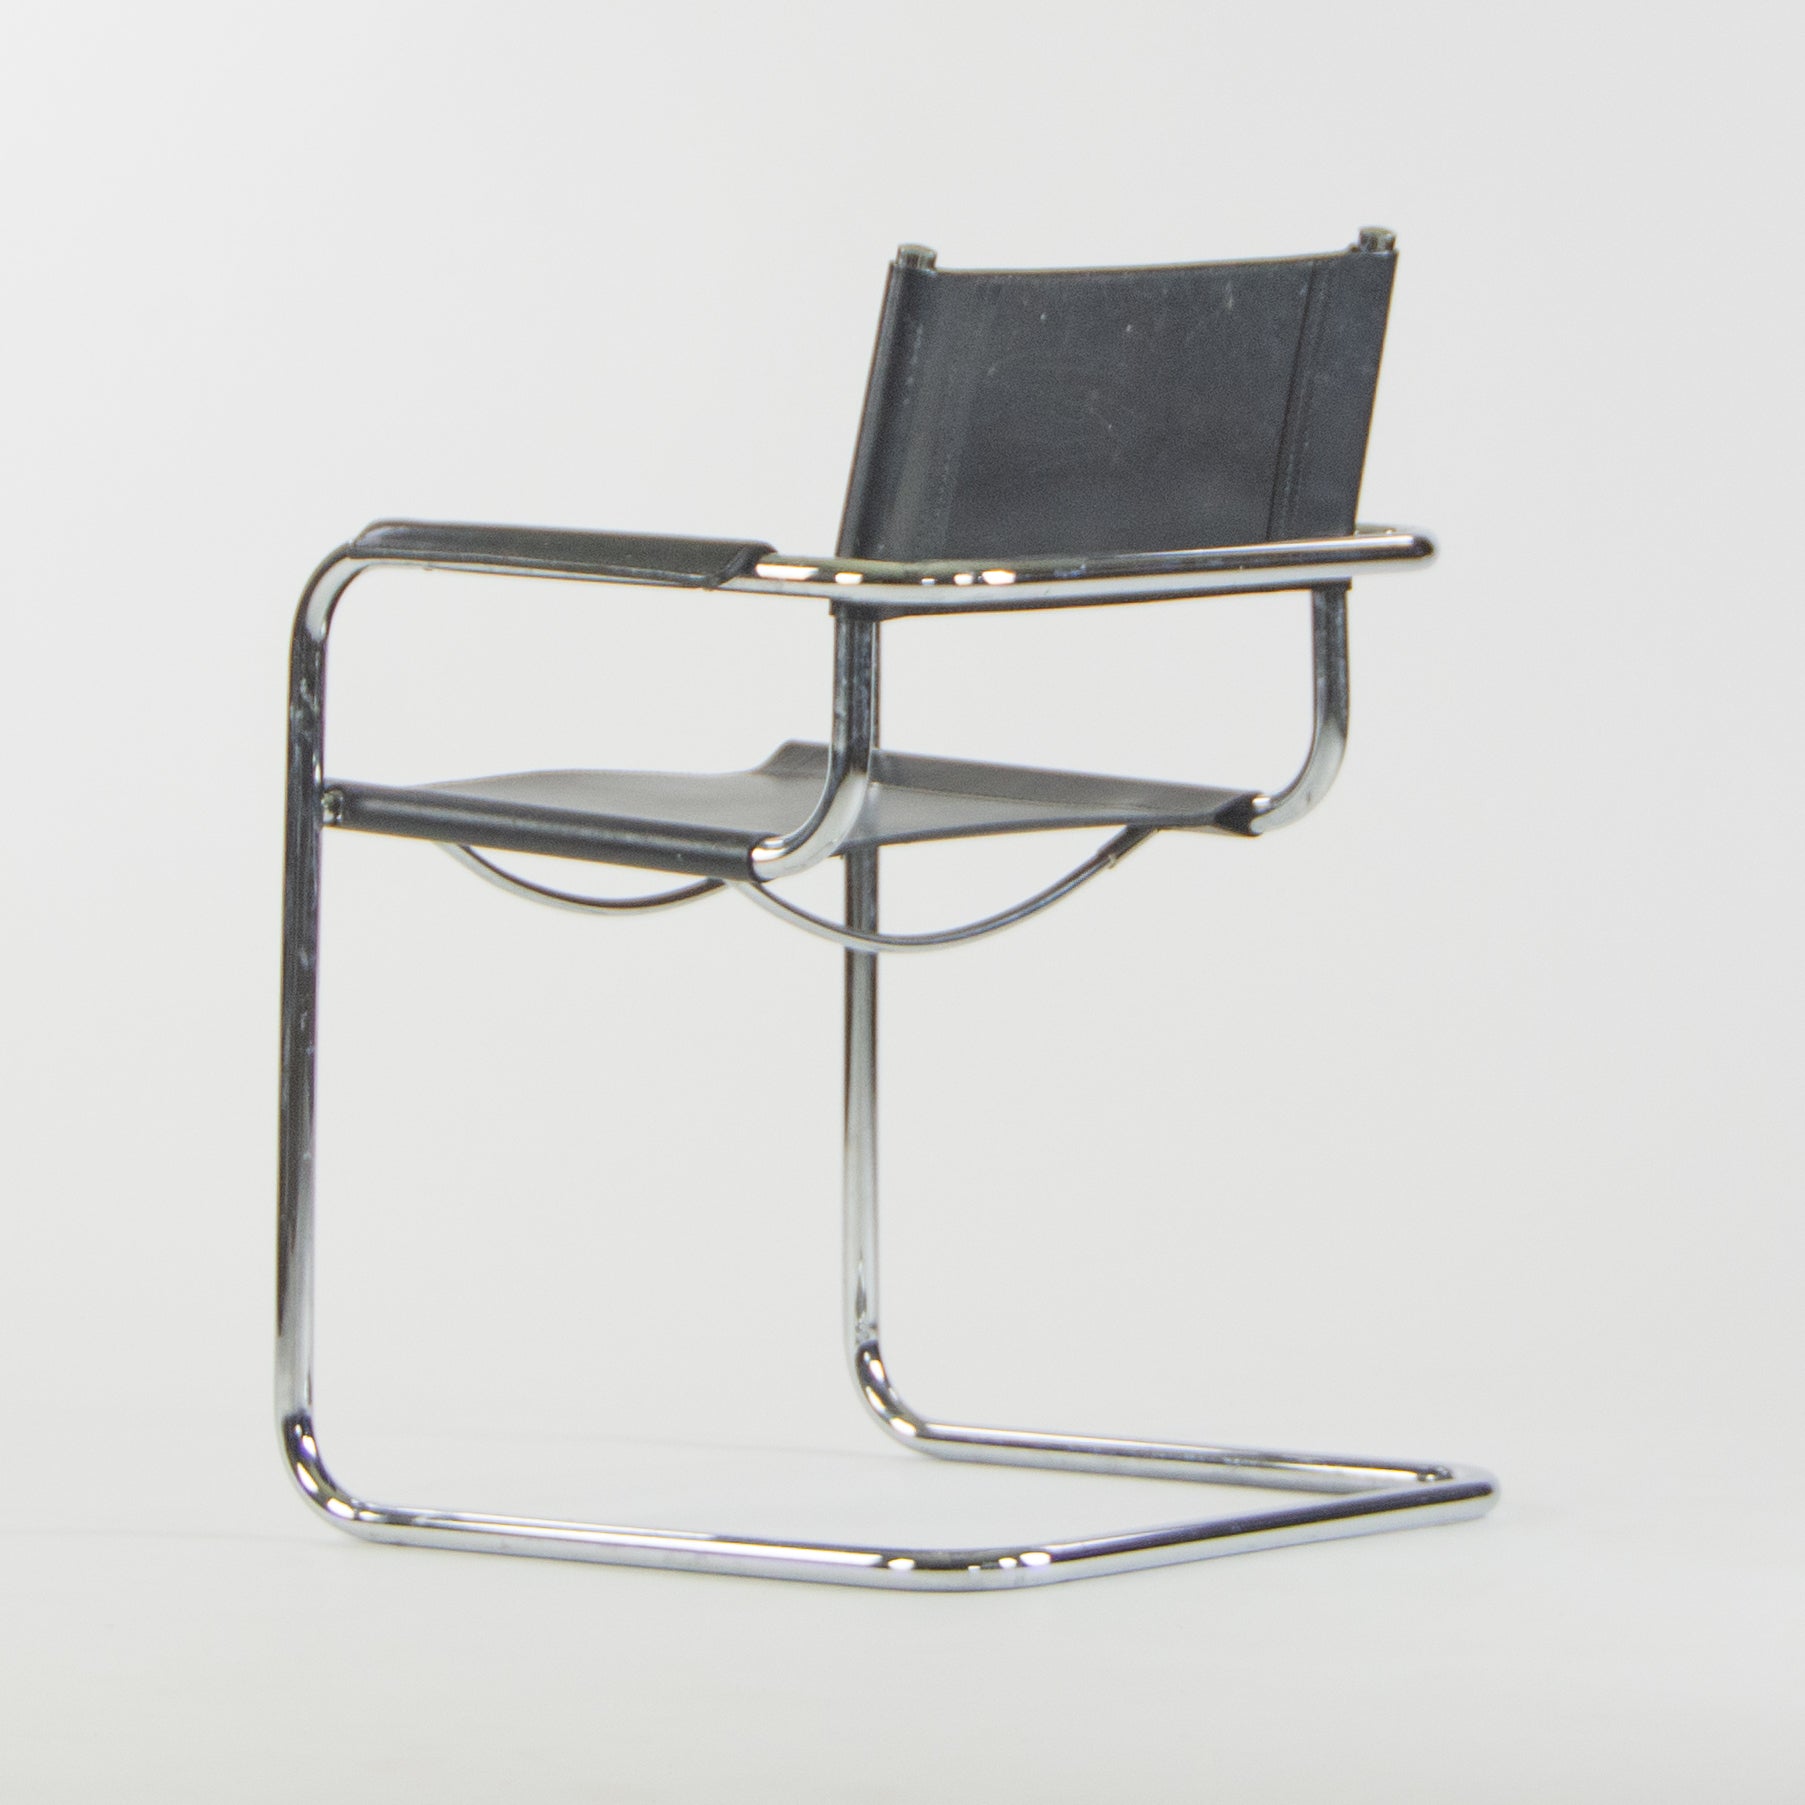 SOLD 1970s Mart Stam S34 for Fasem Set of Six Black Leather Chrome Dining Chairs Knoll